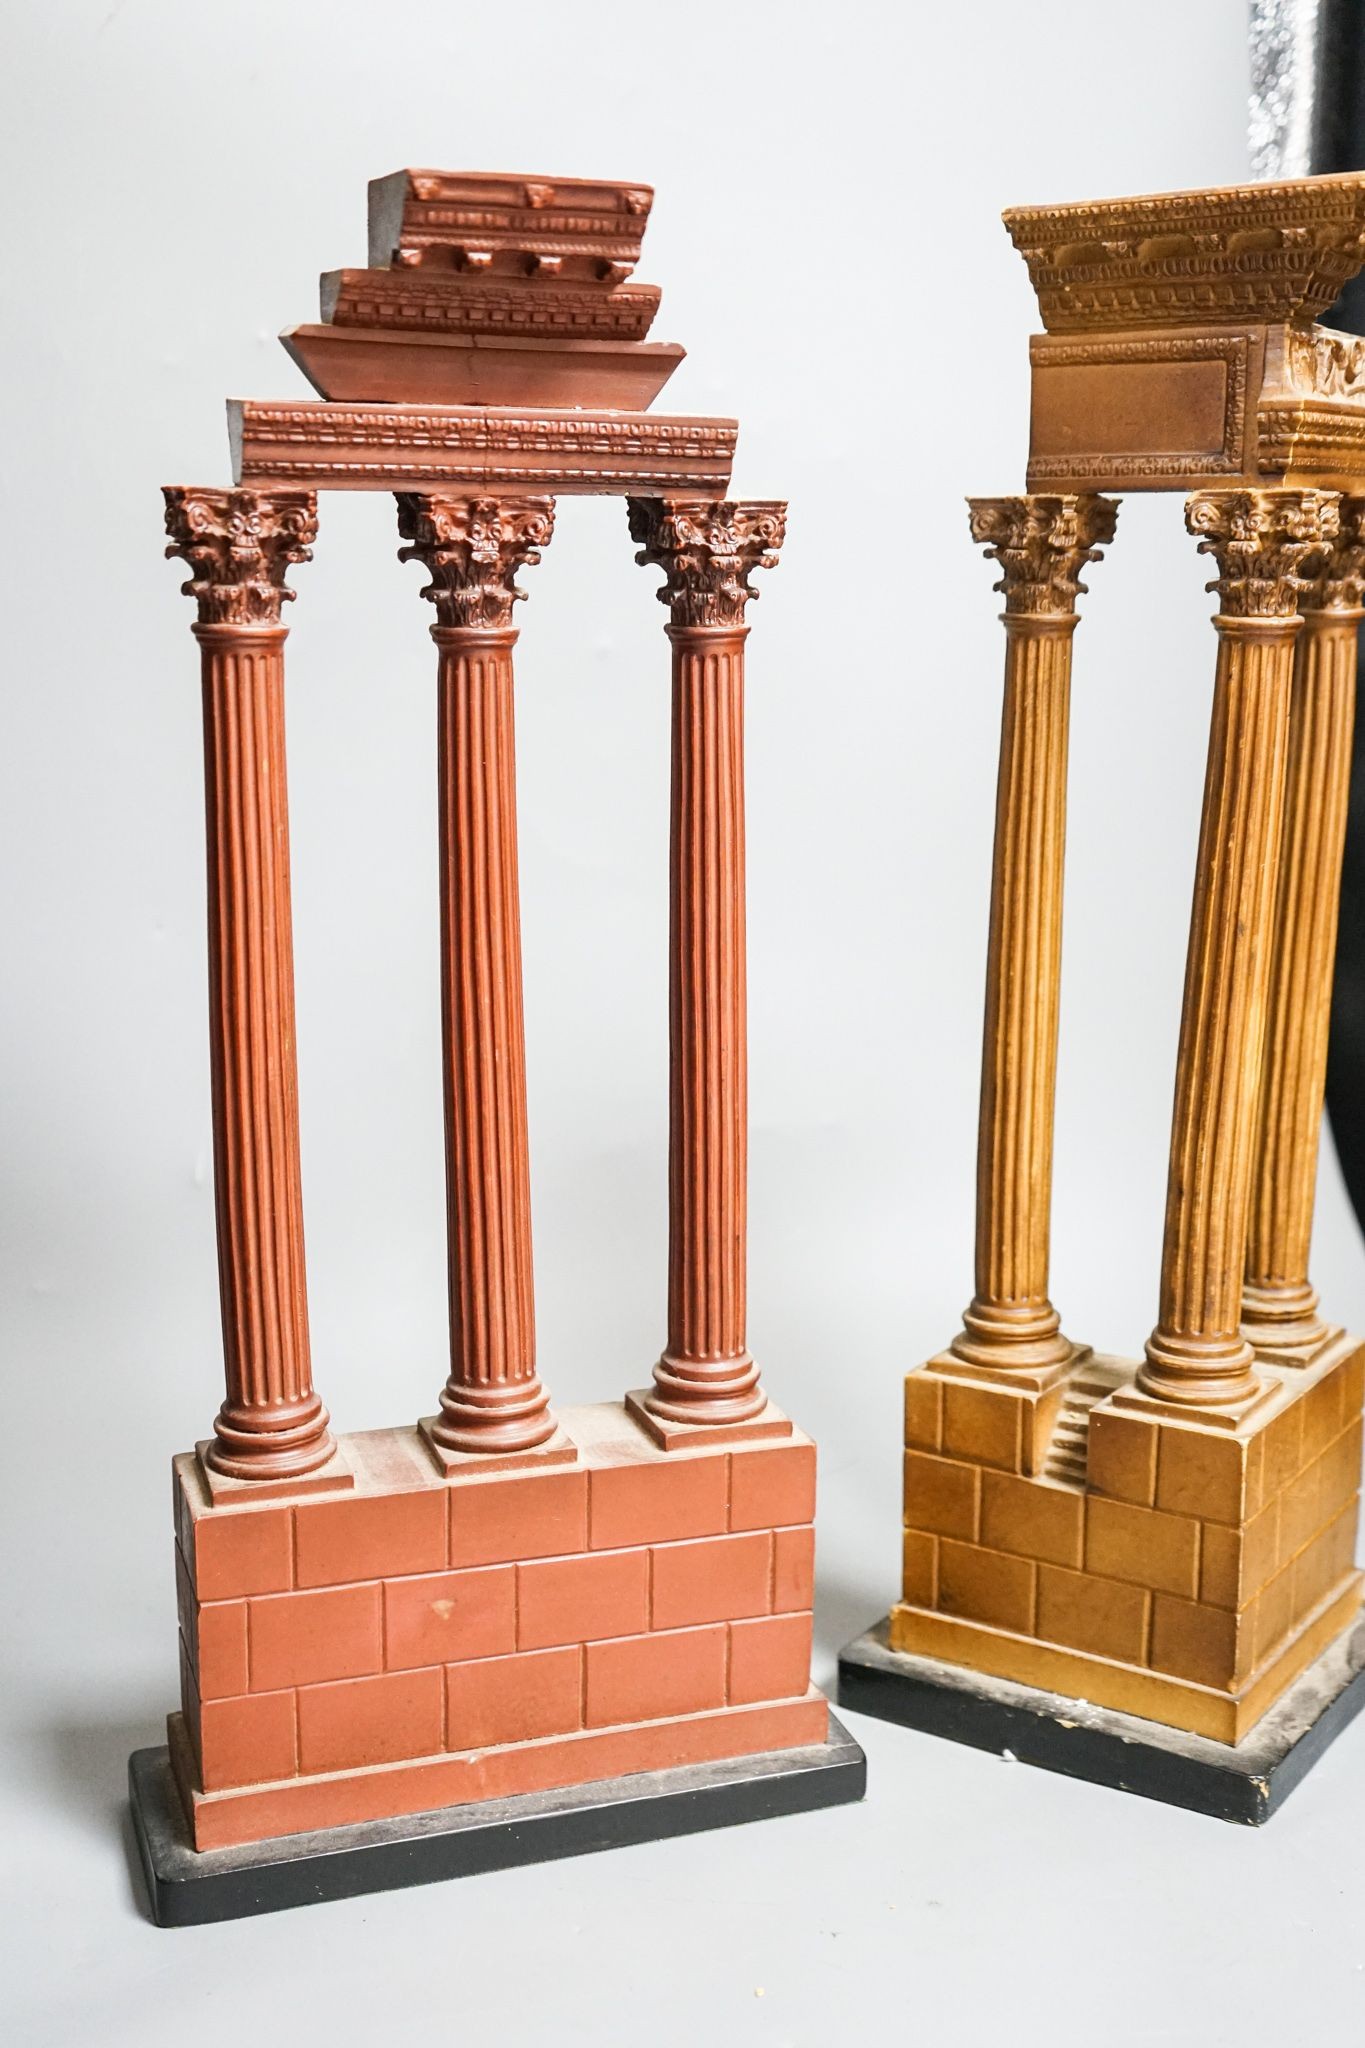 A reproduction resin model of temple of Castor and Pollux and another reproduction temple model (2) 44cm